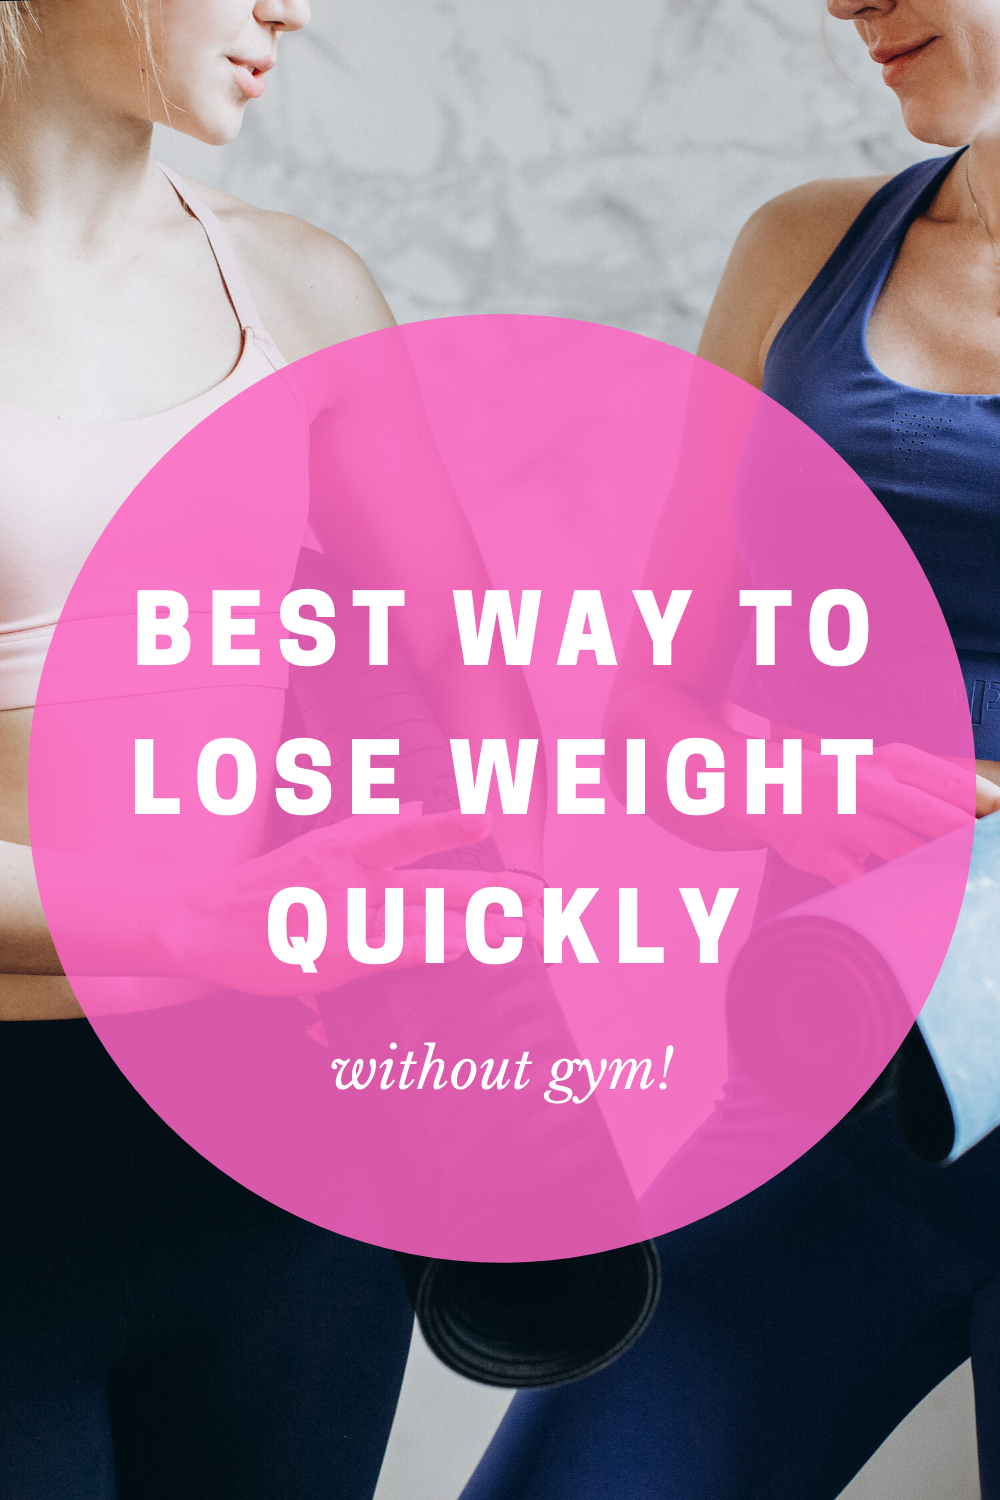 Marie Levato: BEST WAY TO LOSE WEIGHT QUICKLY WITHOUT GYM!